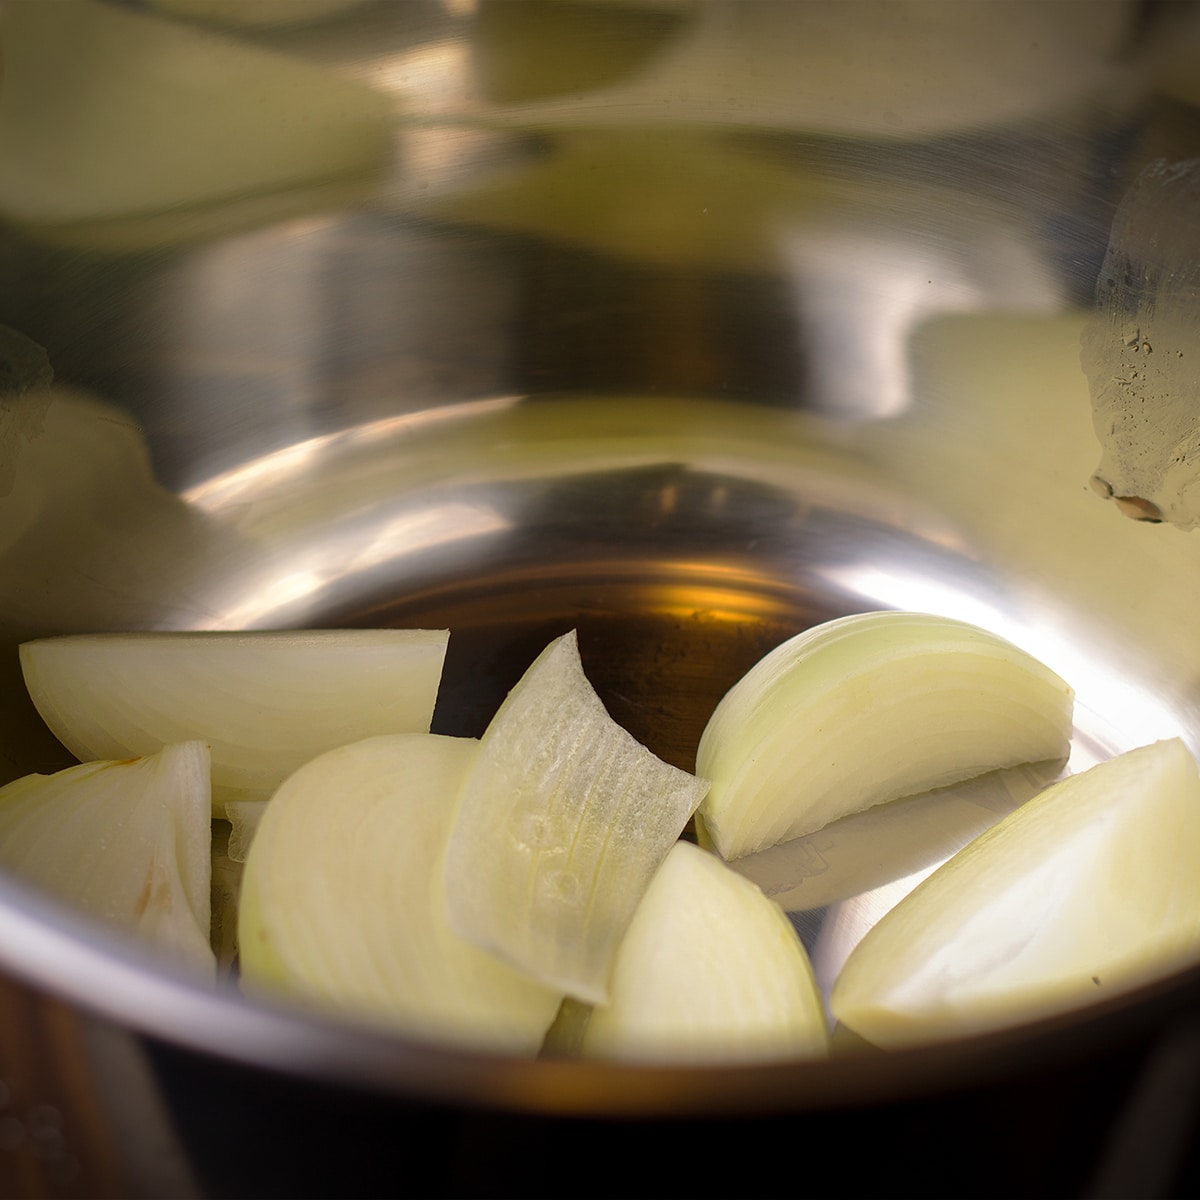 Slices of onion in the bowl of an instant pot.